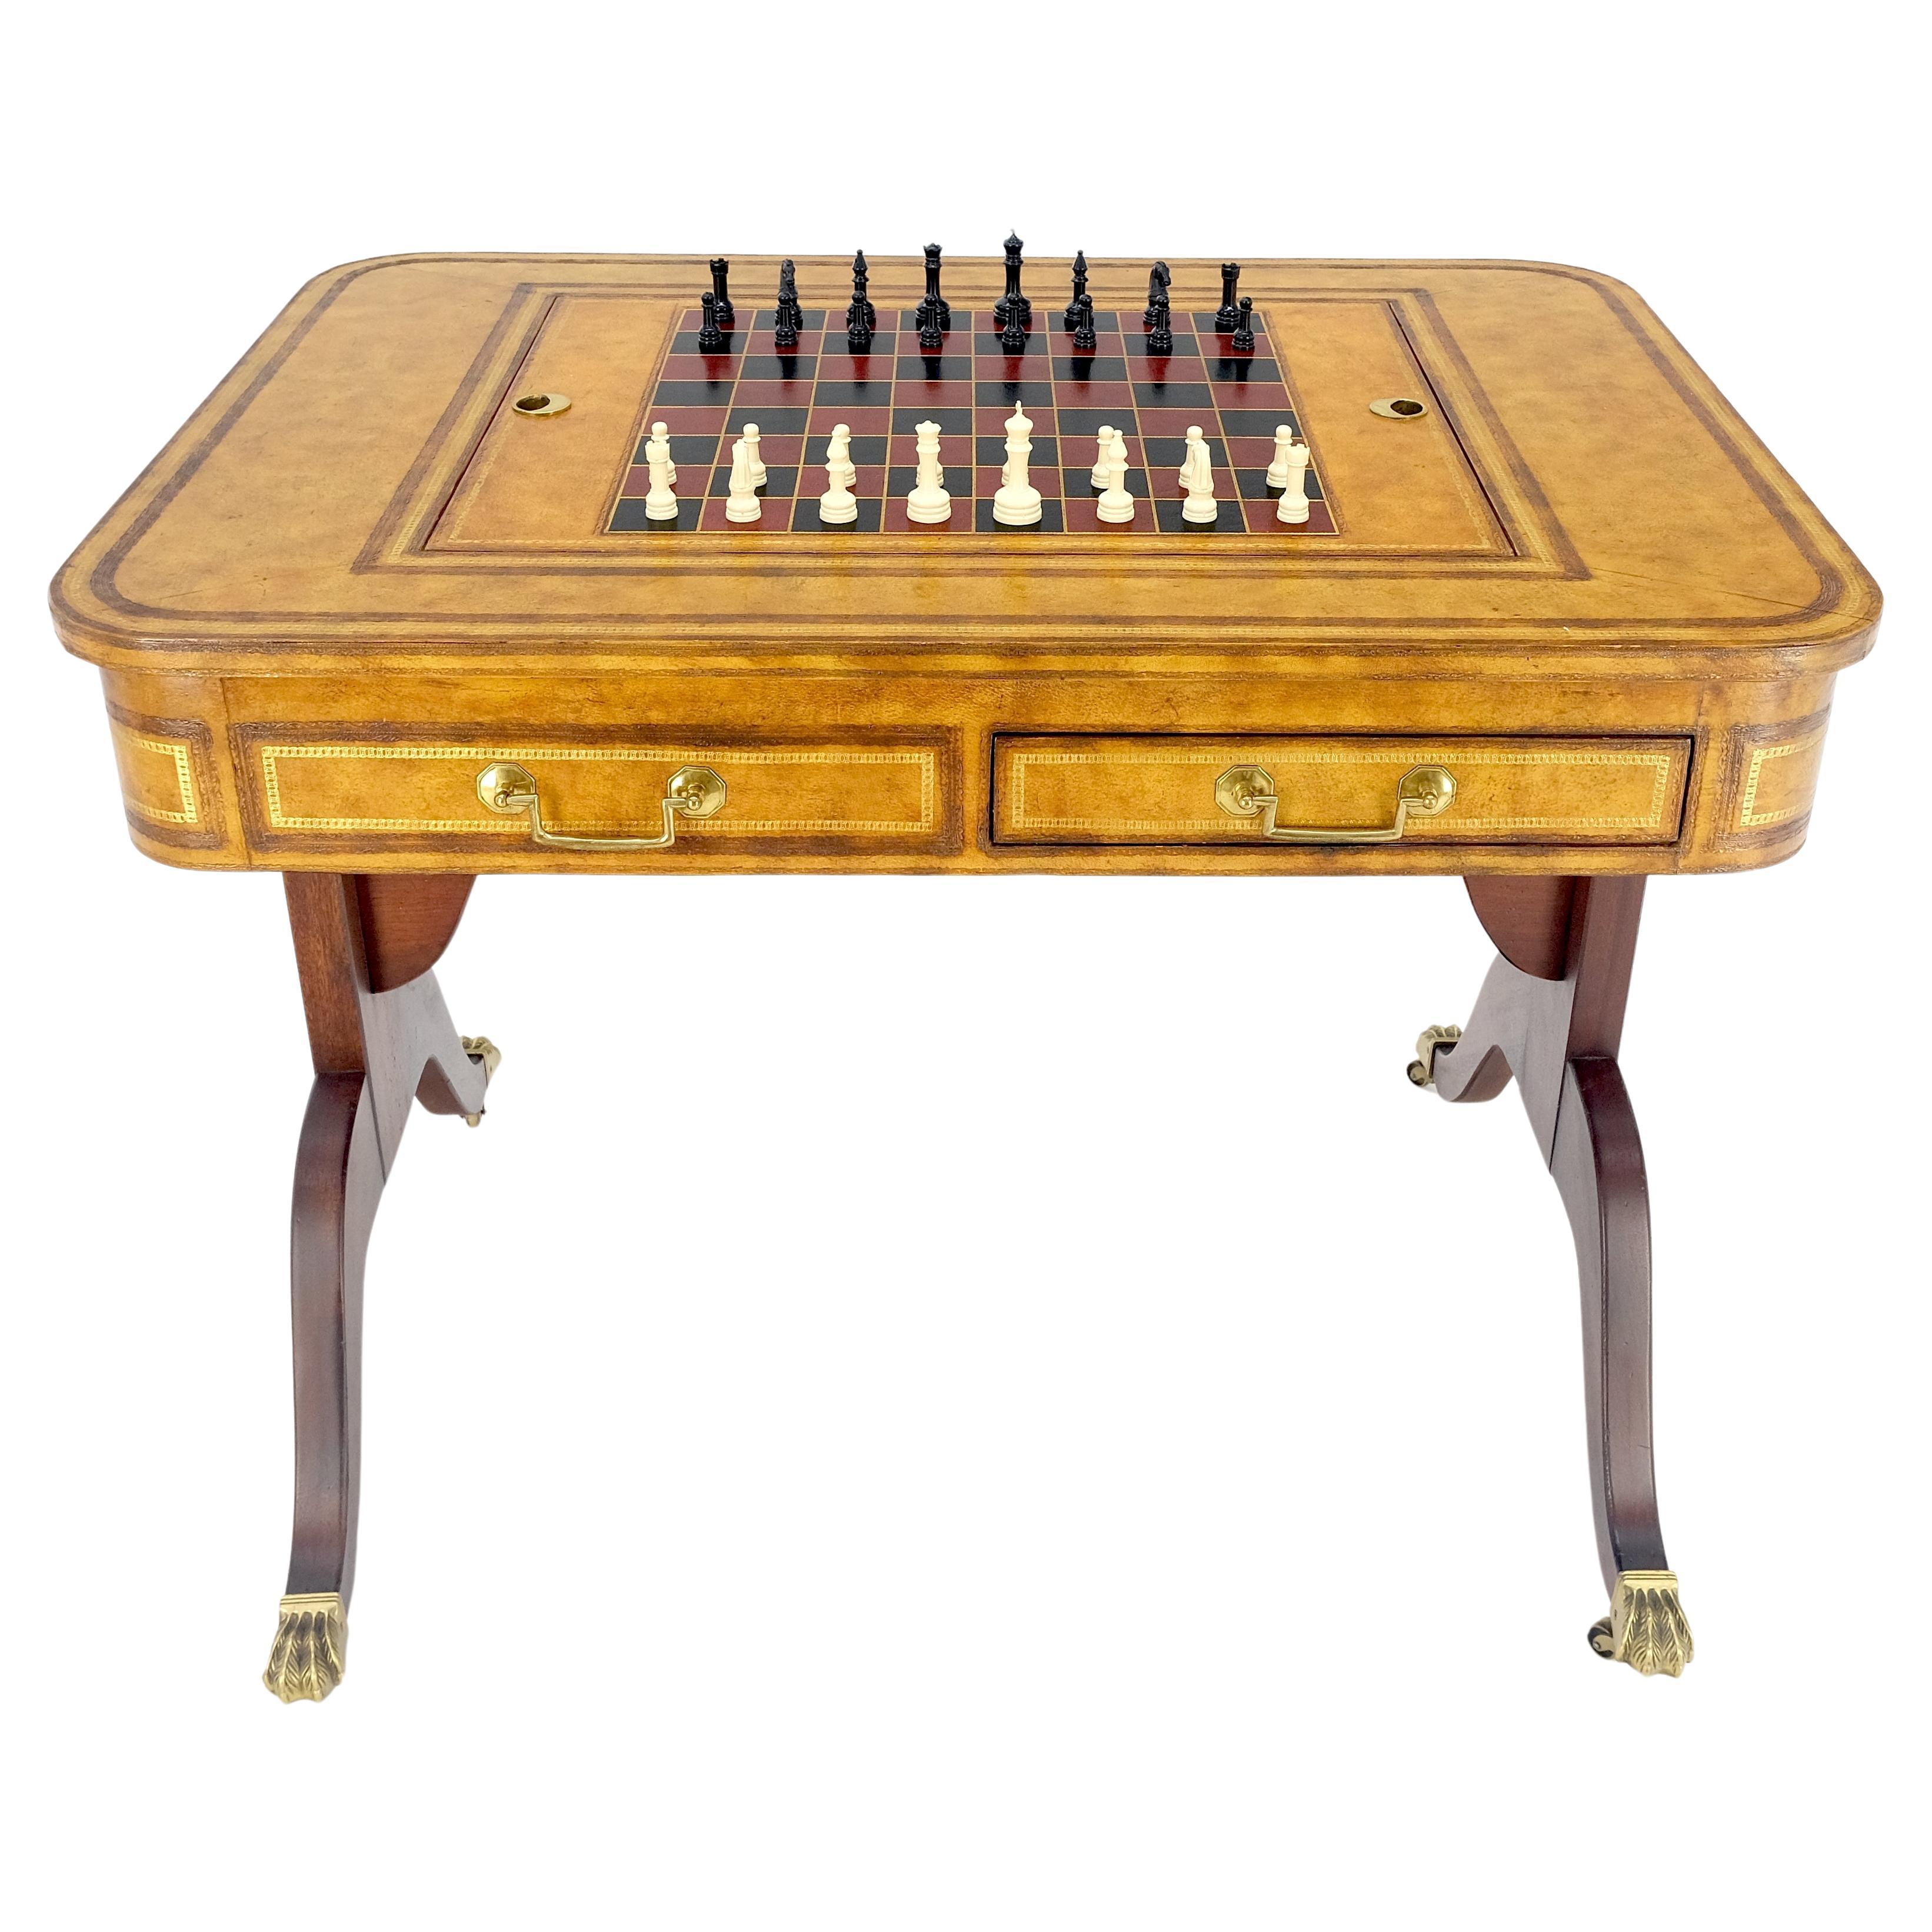 Flit Top Chess Board Backgammon Tooled Leather Top Two Drawers Game Table MINT!